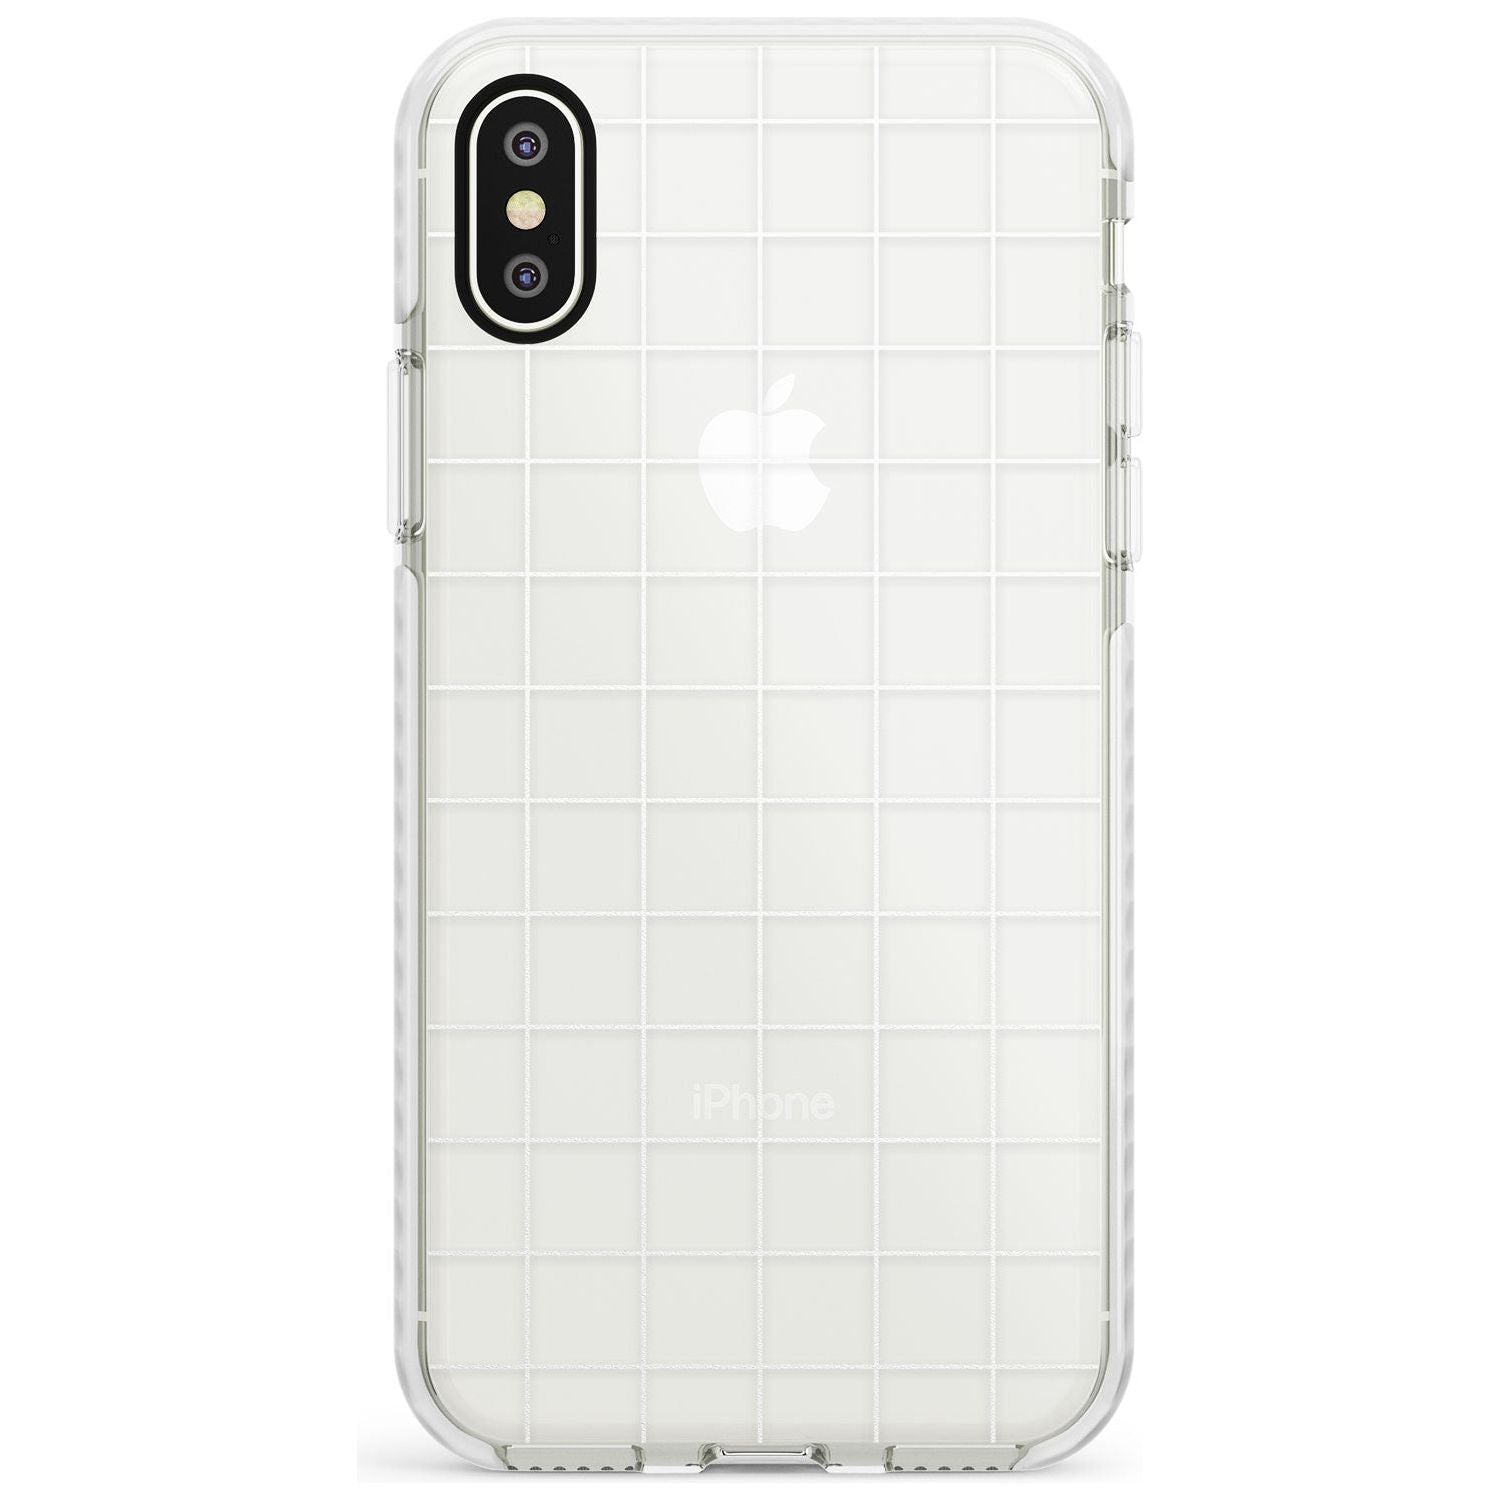 Simplistic Large Grid Pattern White (Transparent) Impact Phone Case for iPhone X XS Max XR